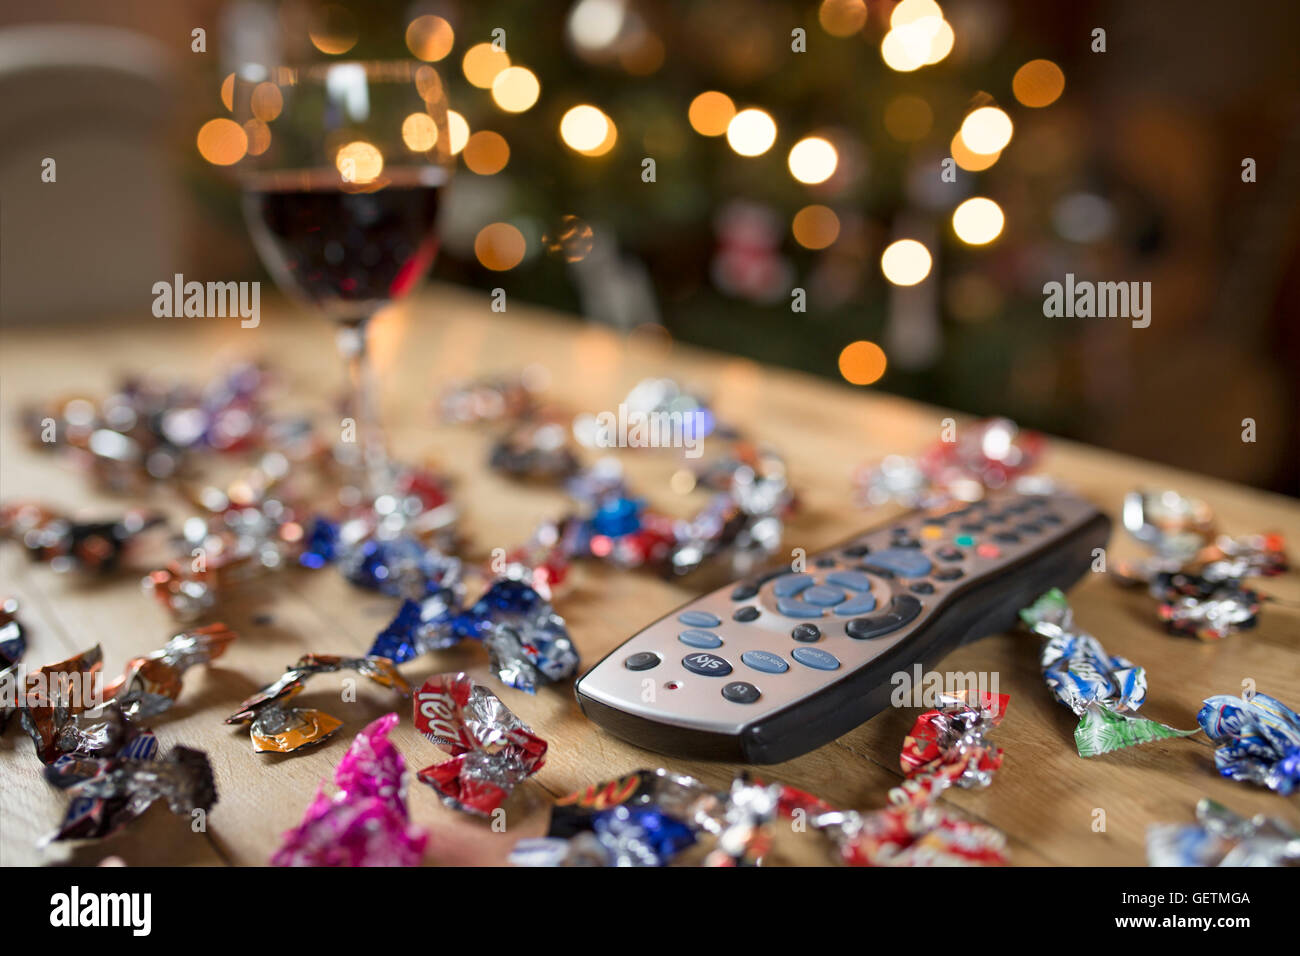 TV remote control surrounded by sweet wrappers and a glass of red wine at Christmas. Stock Photo